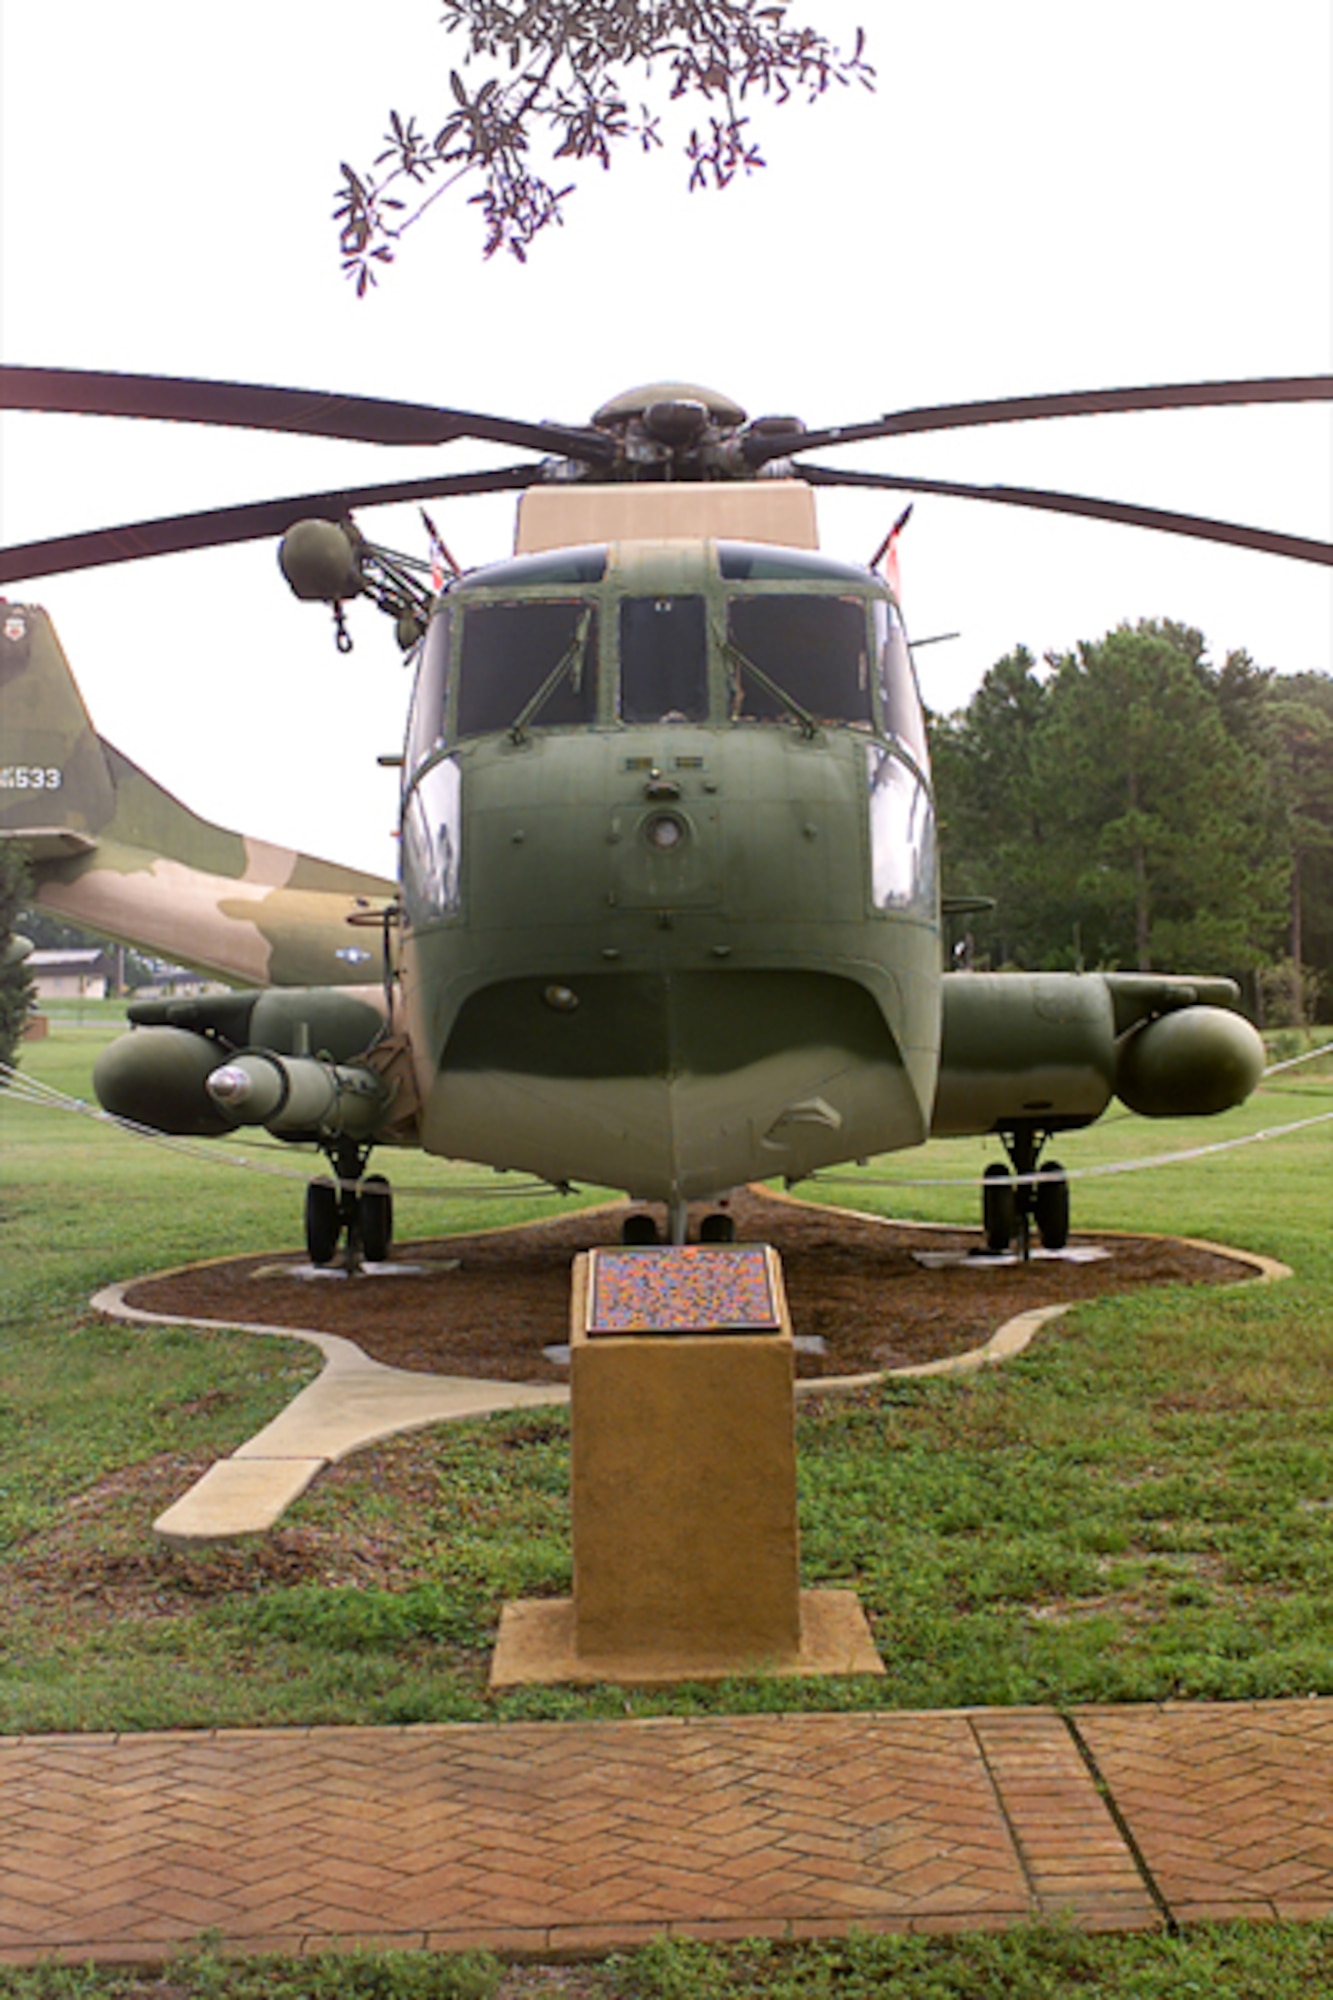 The CH-3E, one of the family of Sikorsky helicopters, served special operations at Hurlburt Field for more than seven years until replaced; by a large helicopter. Two 1,500-horse engines powered the CH-3E, which had a rotor diameter of 62 feet, a fuselage length of 57 feet 3 inches, and empty gross weights of 13,255 and 22,050 pounds respectively.